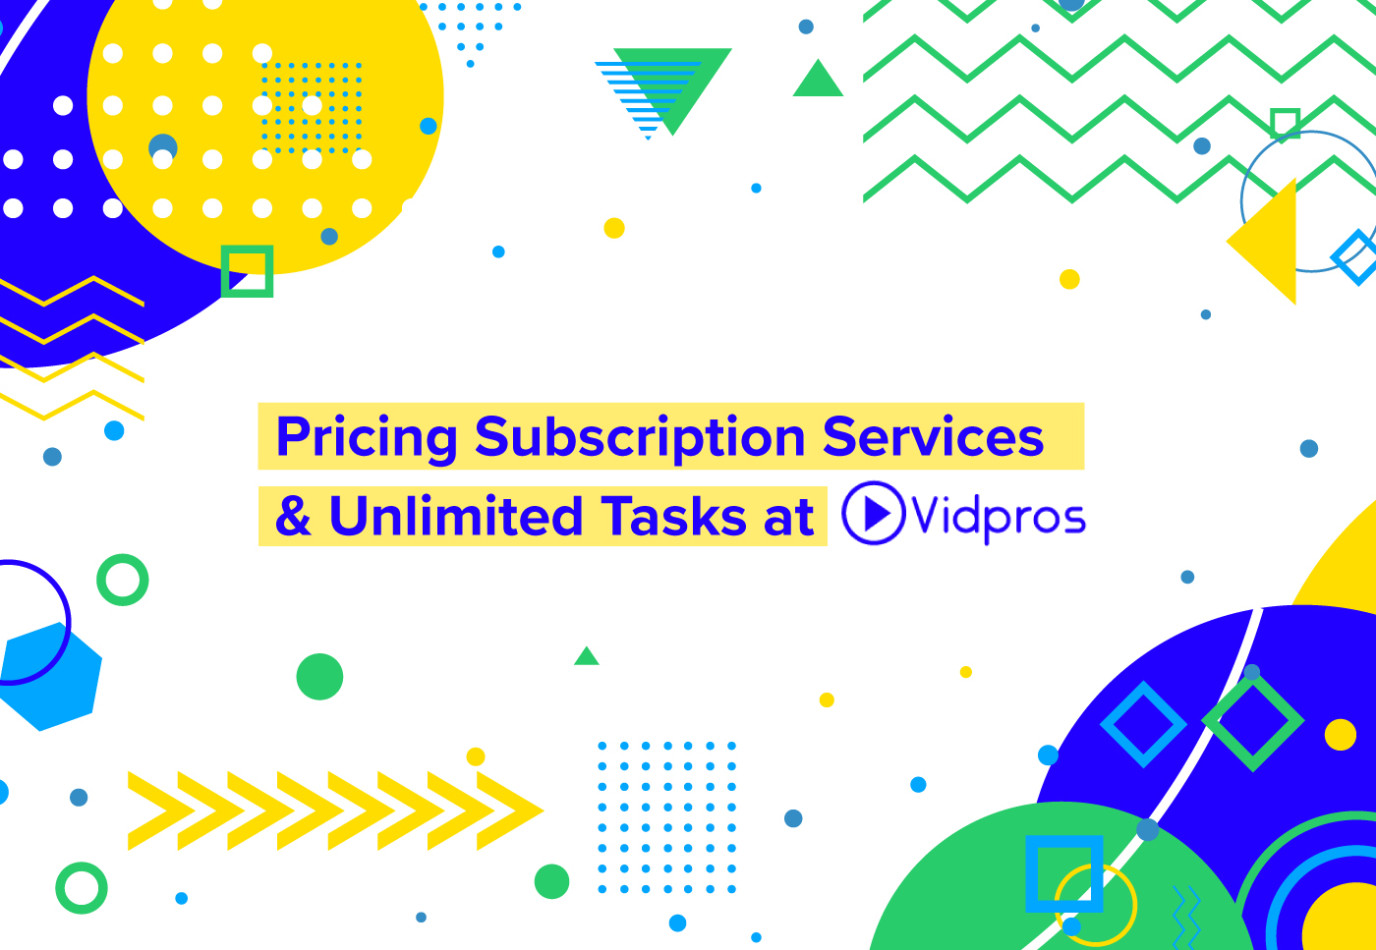 Pricing Subscriptions Services and Unlimited Tasks at Vidpros